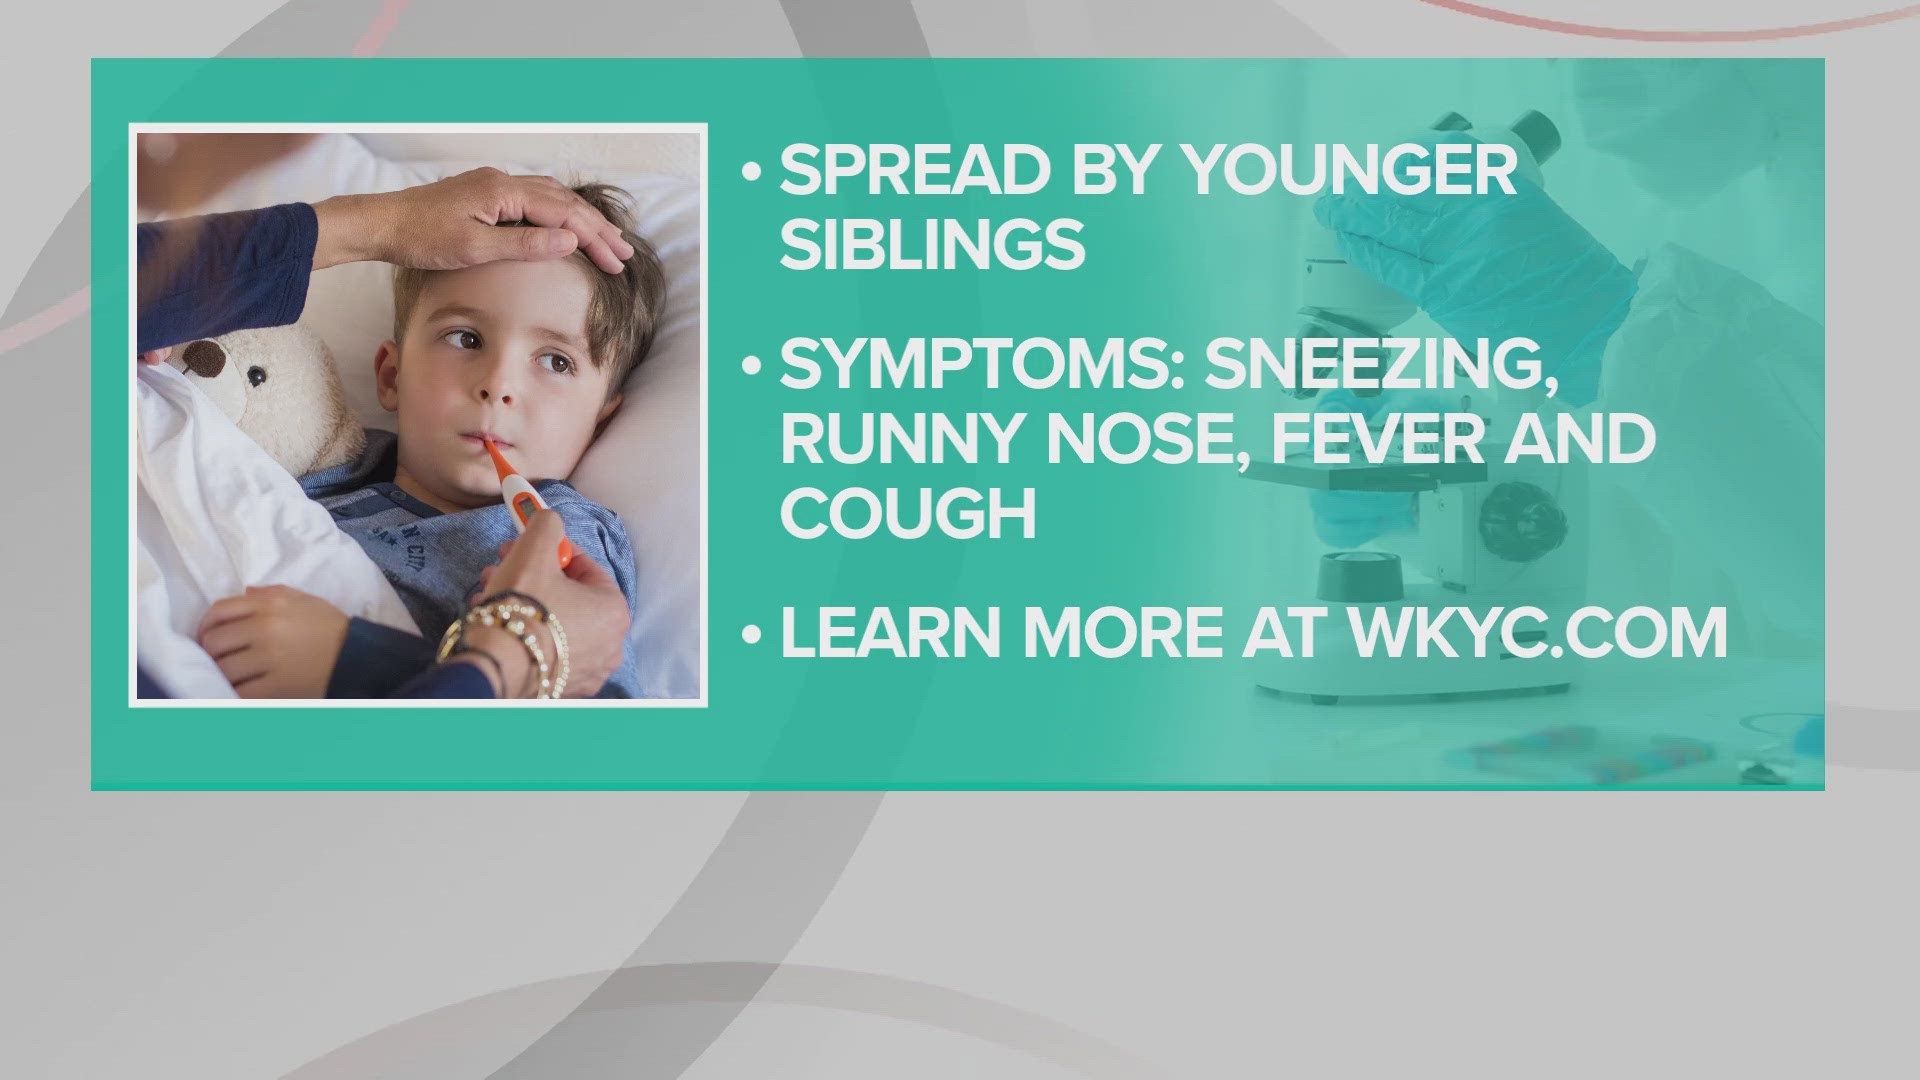 Highland school officials advise that if a student exhibits symptoms of whooping cough, contact their doctor or the Medina County Health Department.